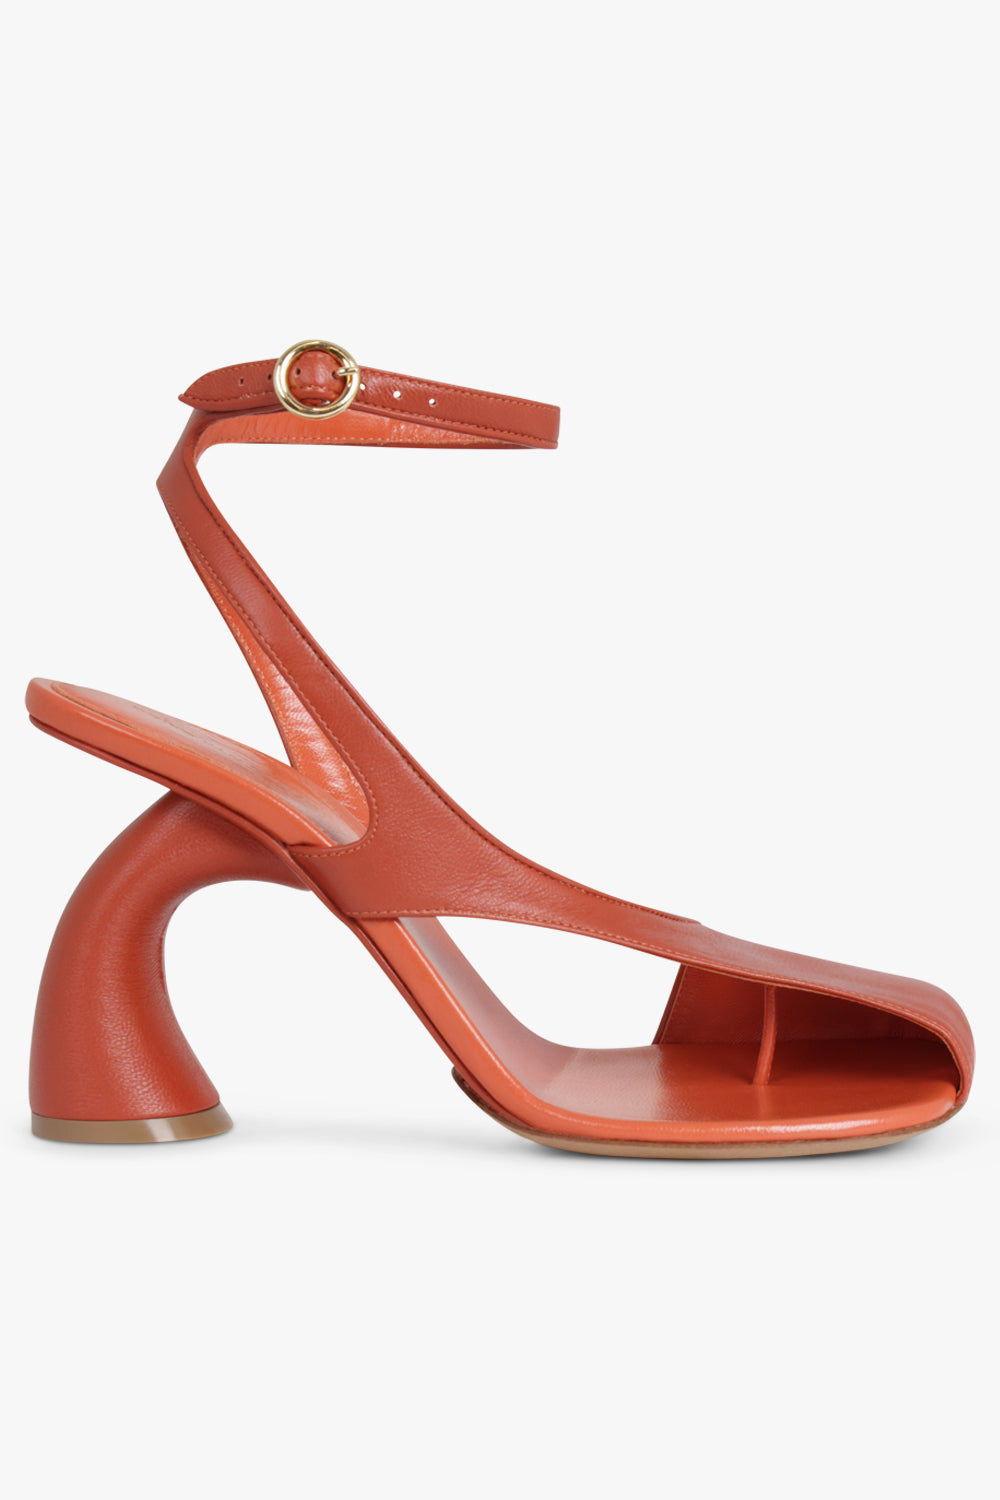 DRIES VAN NOTEN SHOES Ankle Wrap Cut Out Curved Heel Pump | Rust